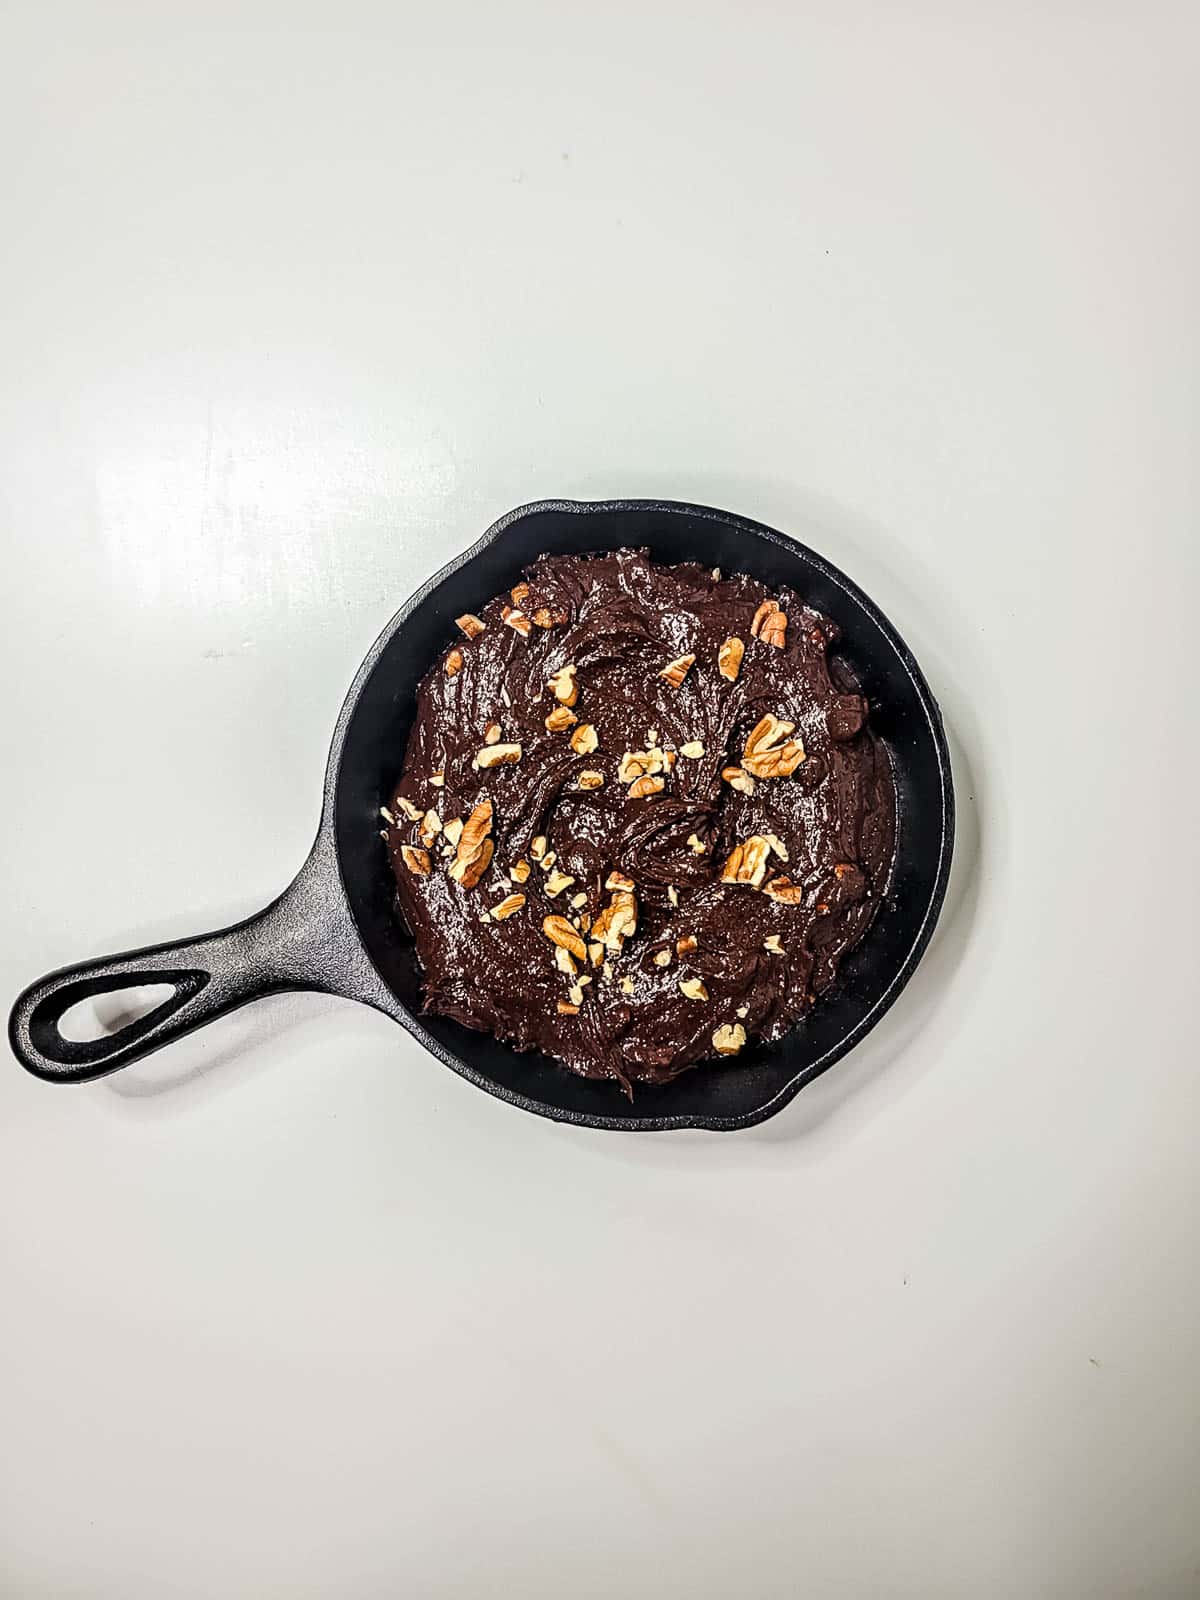 Cast iron skillet brownie before being baked.